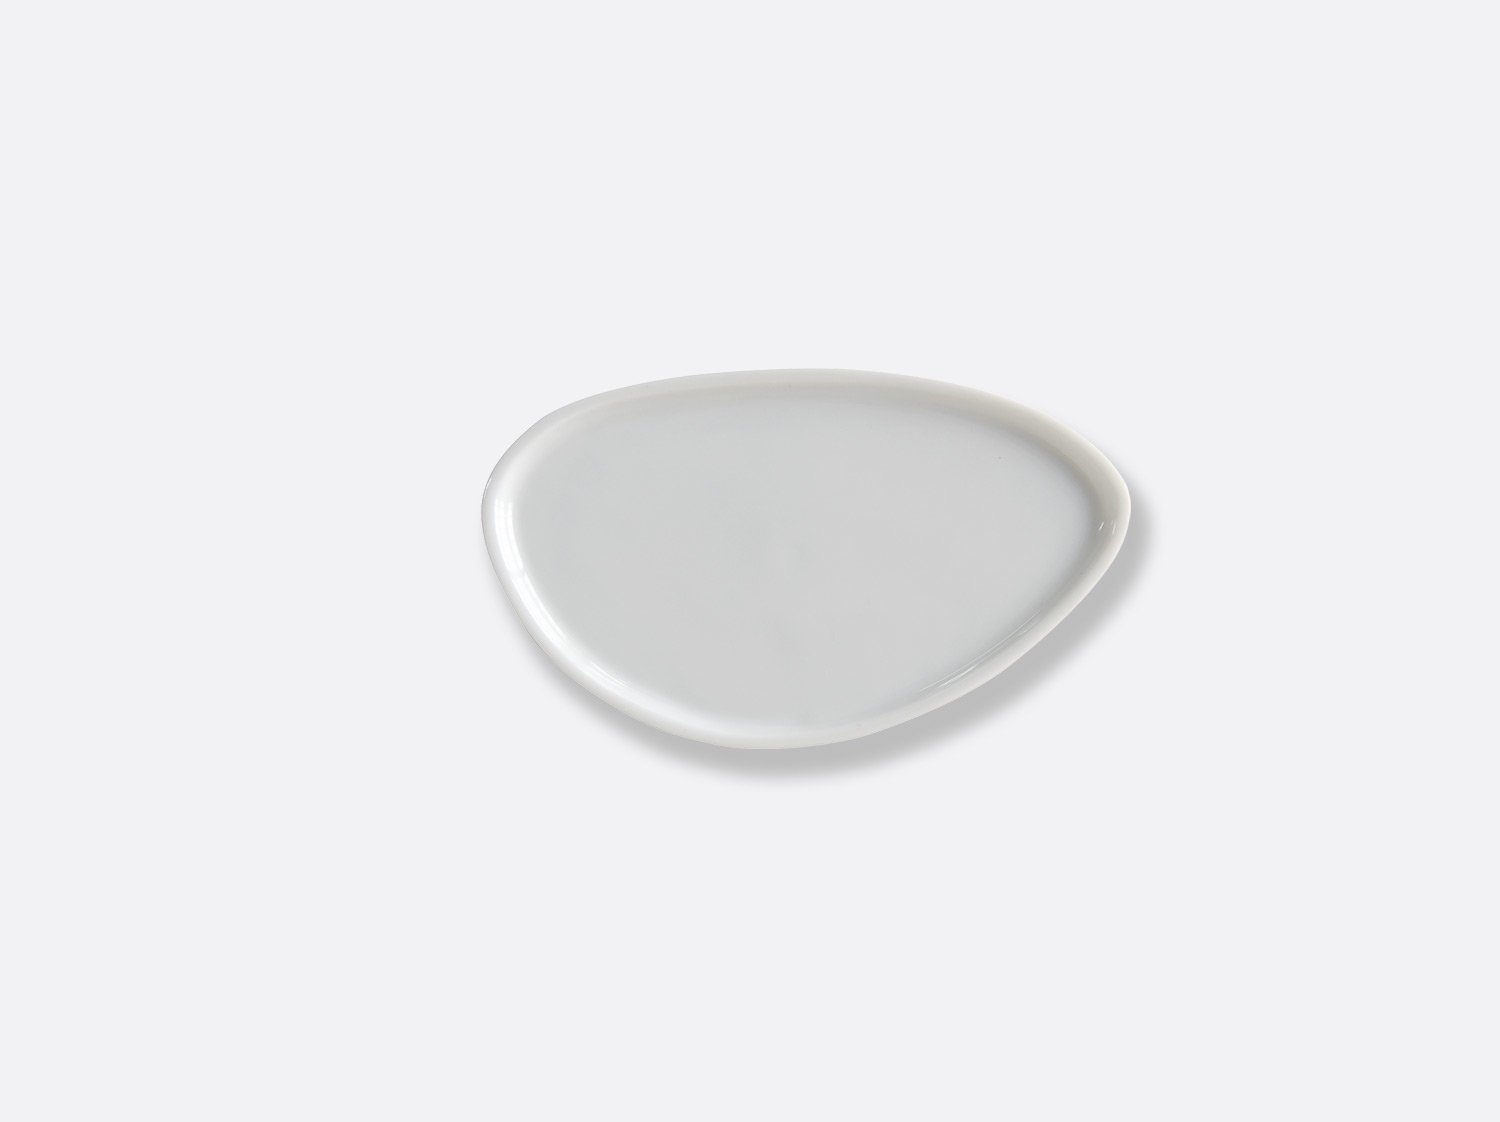 China Platter S5 white of the collection Ombres - Sarah-Linda Forrer | Bernardaud